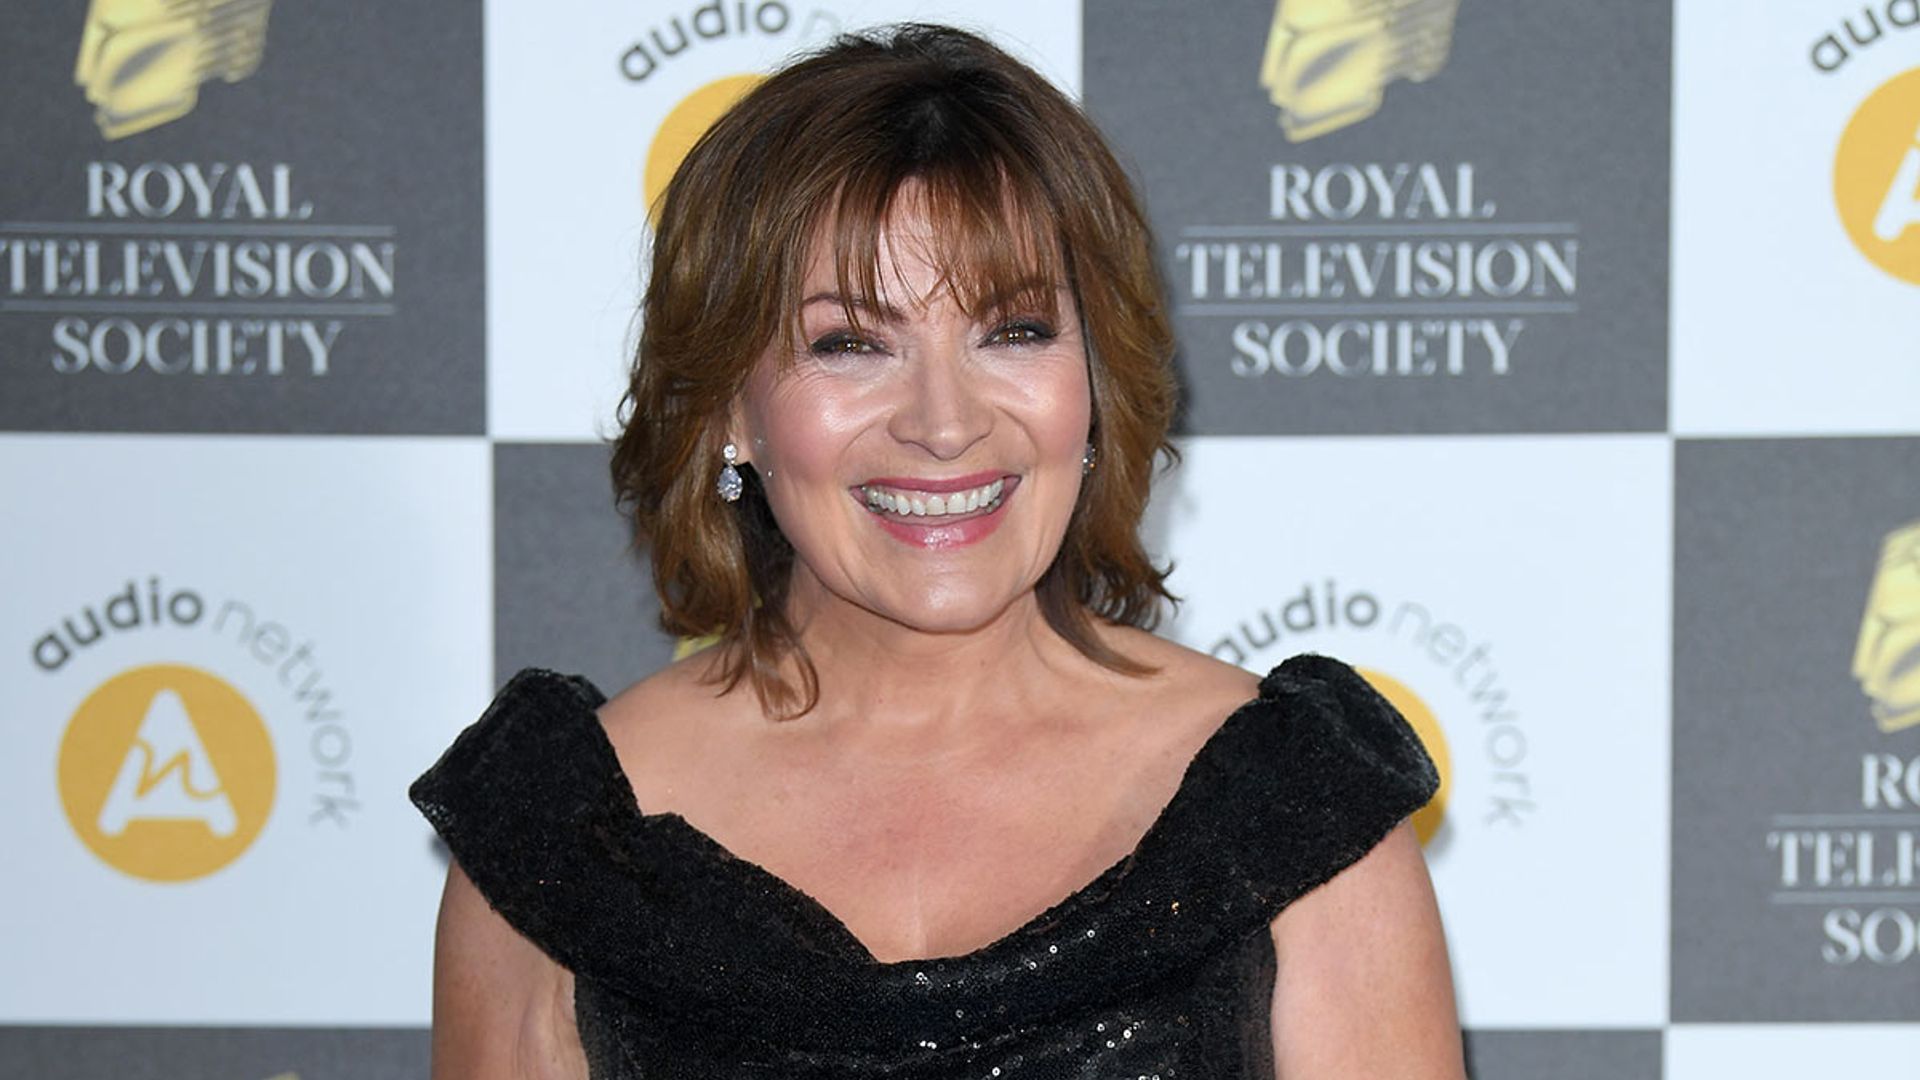 Fans are going wild for Lorraine Kelly's TWO bargain ASOS dresses